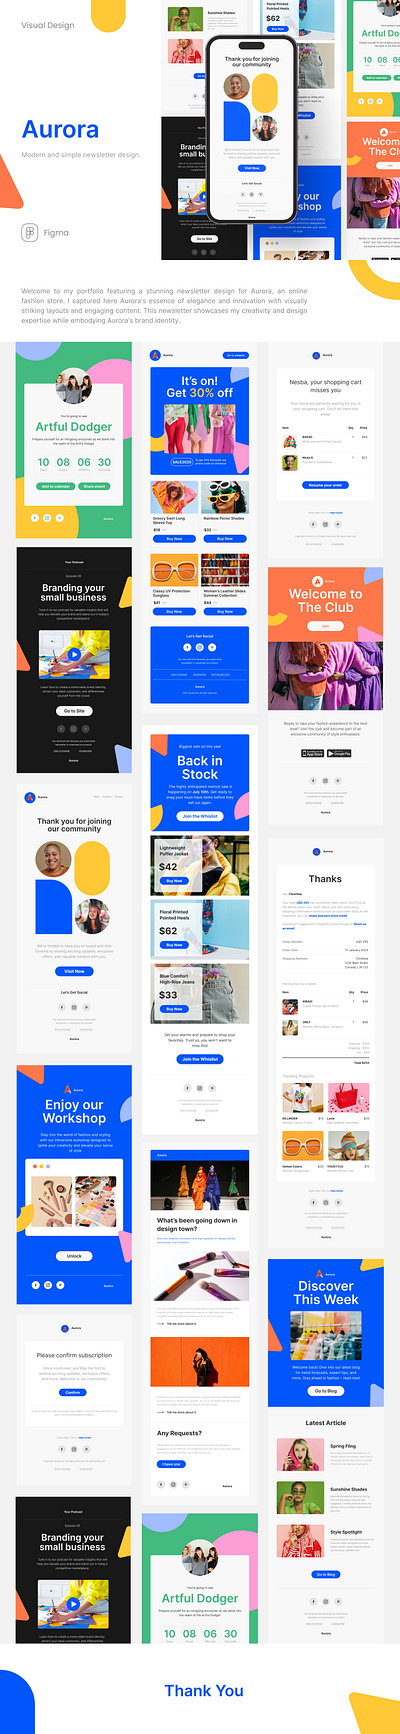 Email and Newsletter Design brand identity branding email marketing email template fashion brand newsletter figma newsletter graphic design logo design newsletter newsletter design ui uiux visual design visual identity